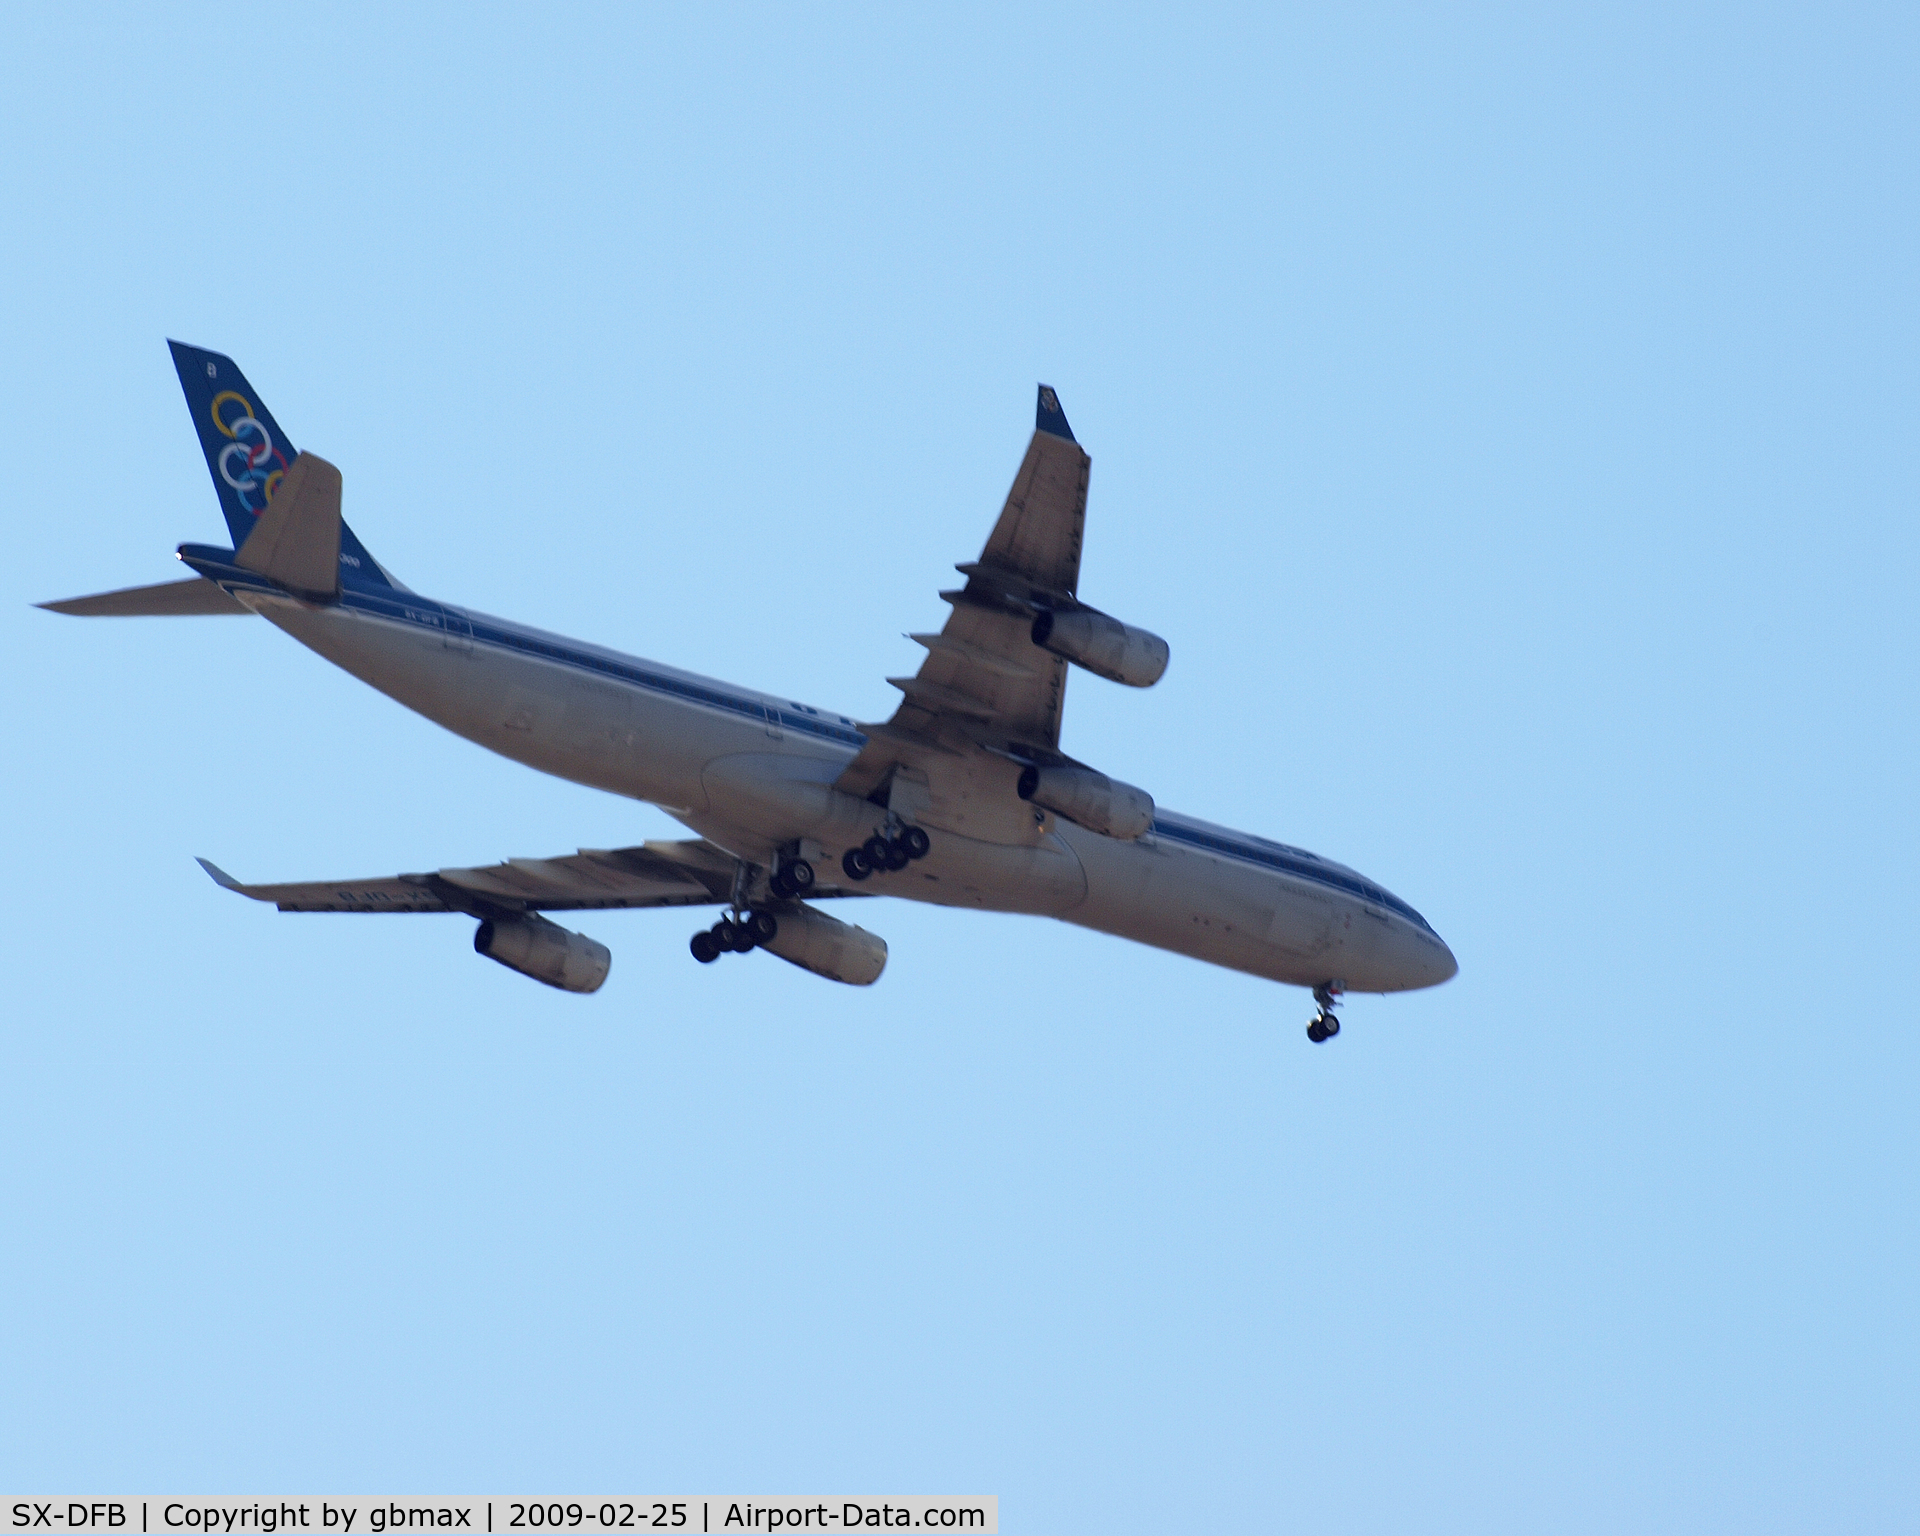 SX-DFB, 1999 Airbus A340-313X C/N 239, Flying @ ~3,500 feet high, going to a landing at JFK